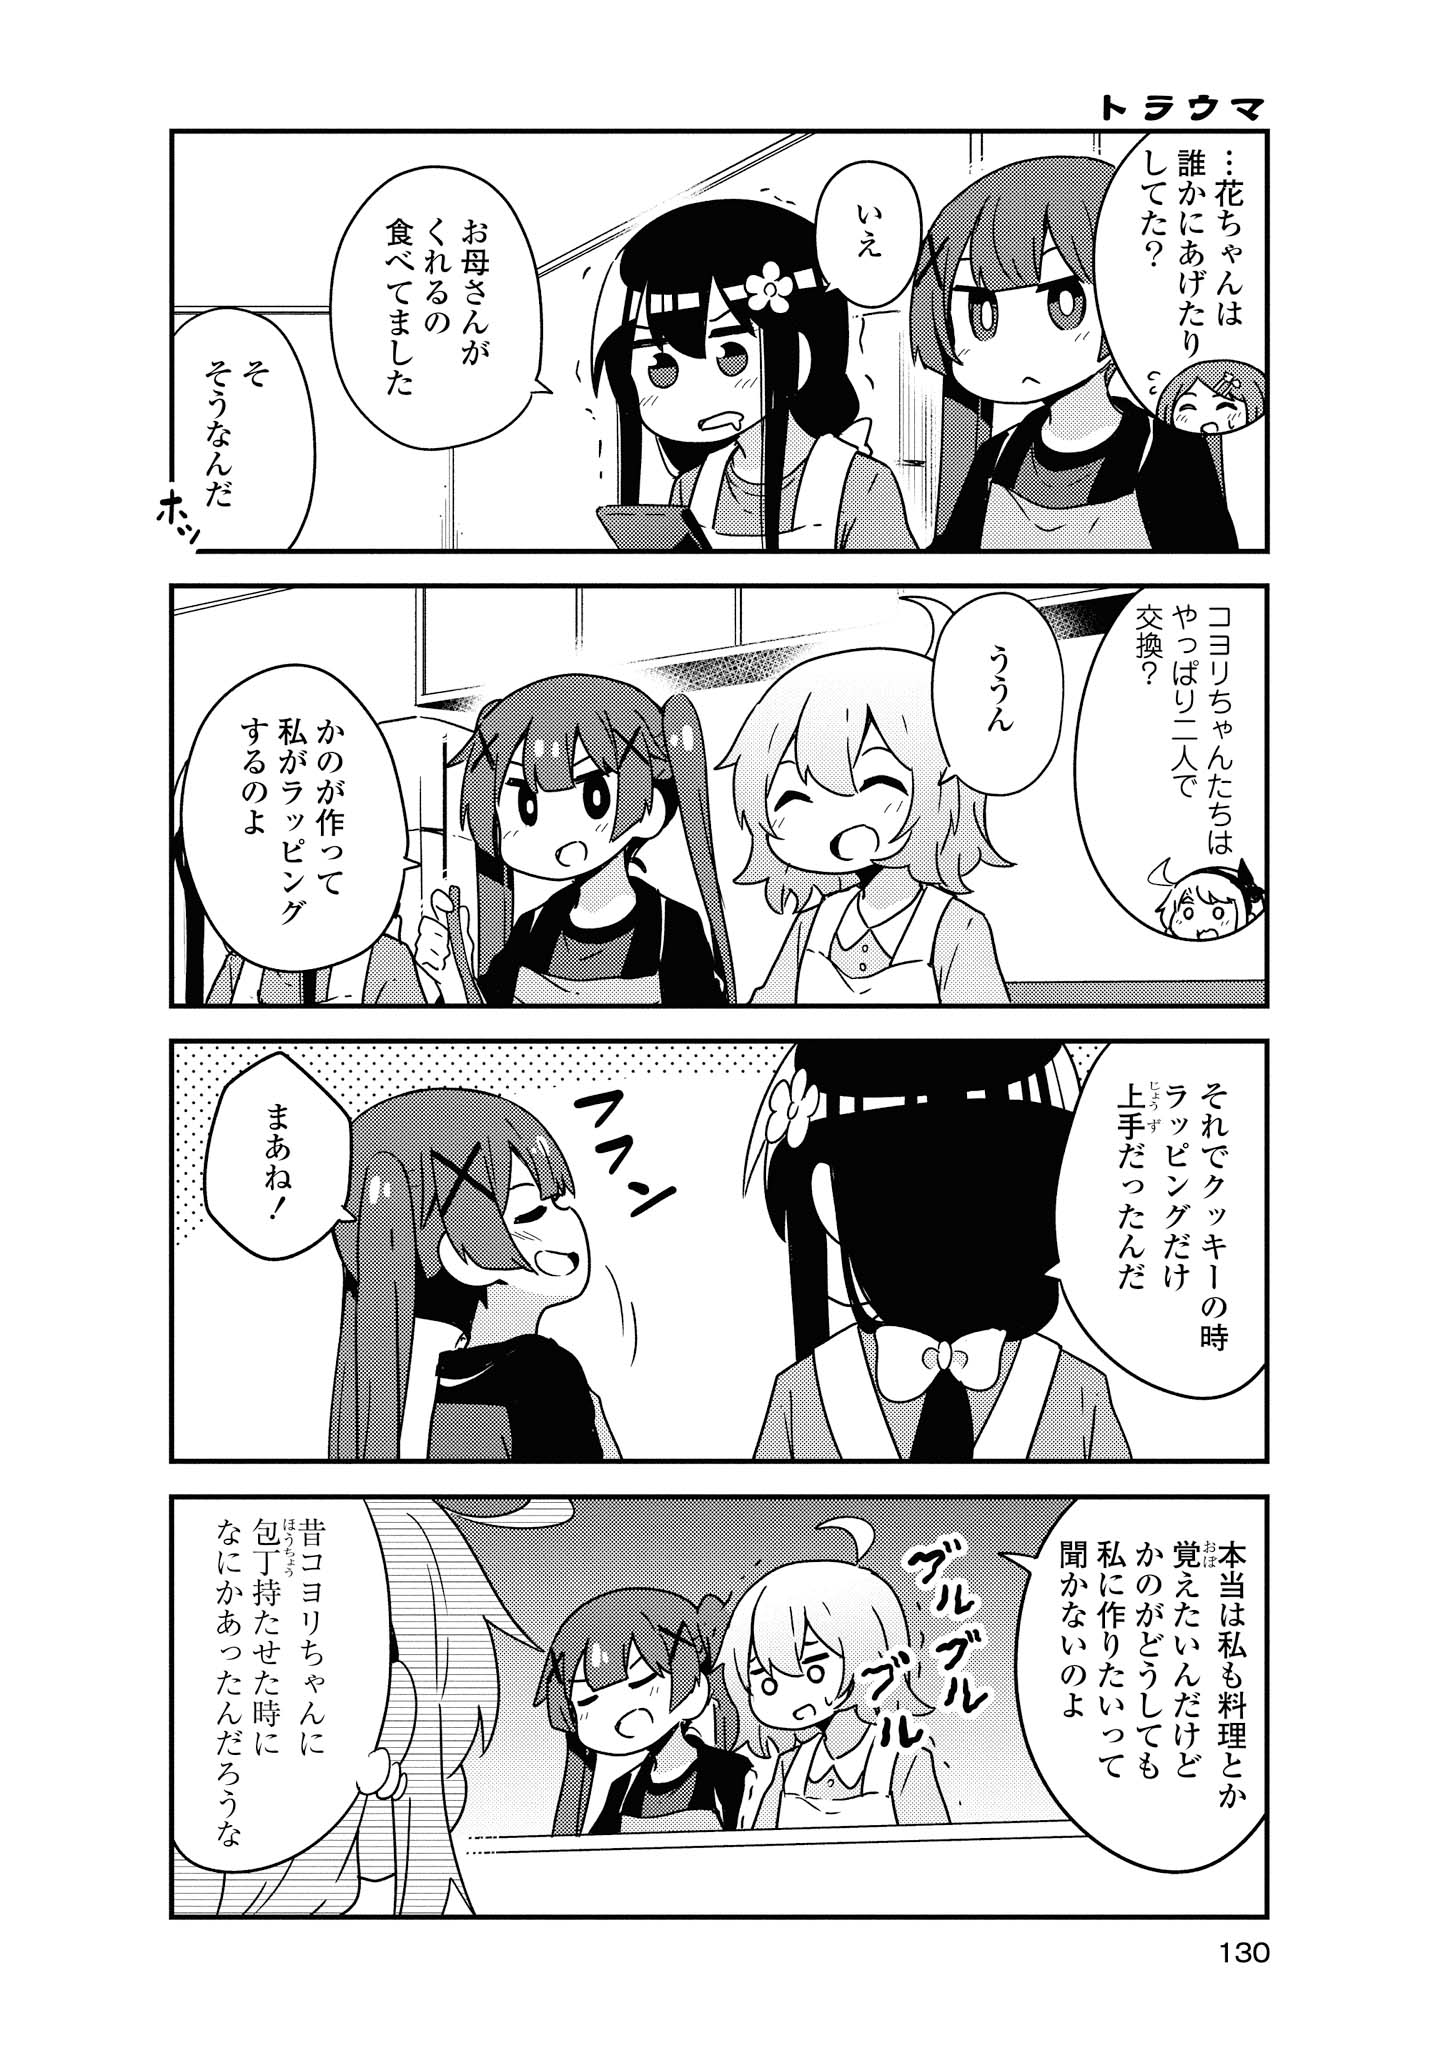 Wataten! An Angel Flew Down to Me 私に天使が舞い降りた！ 第51話 - Page 6